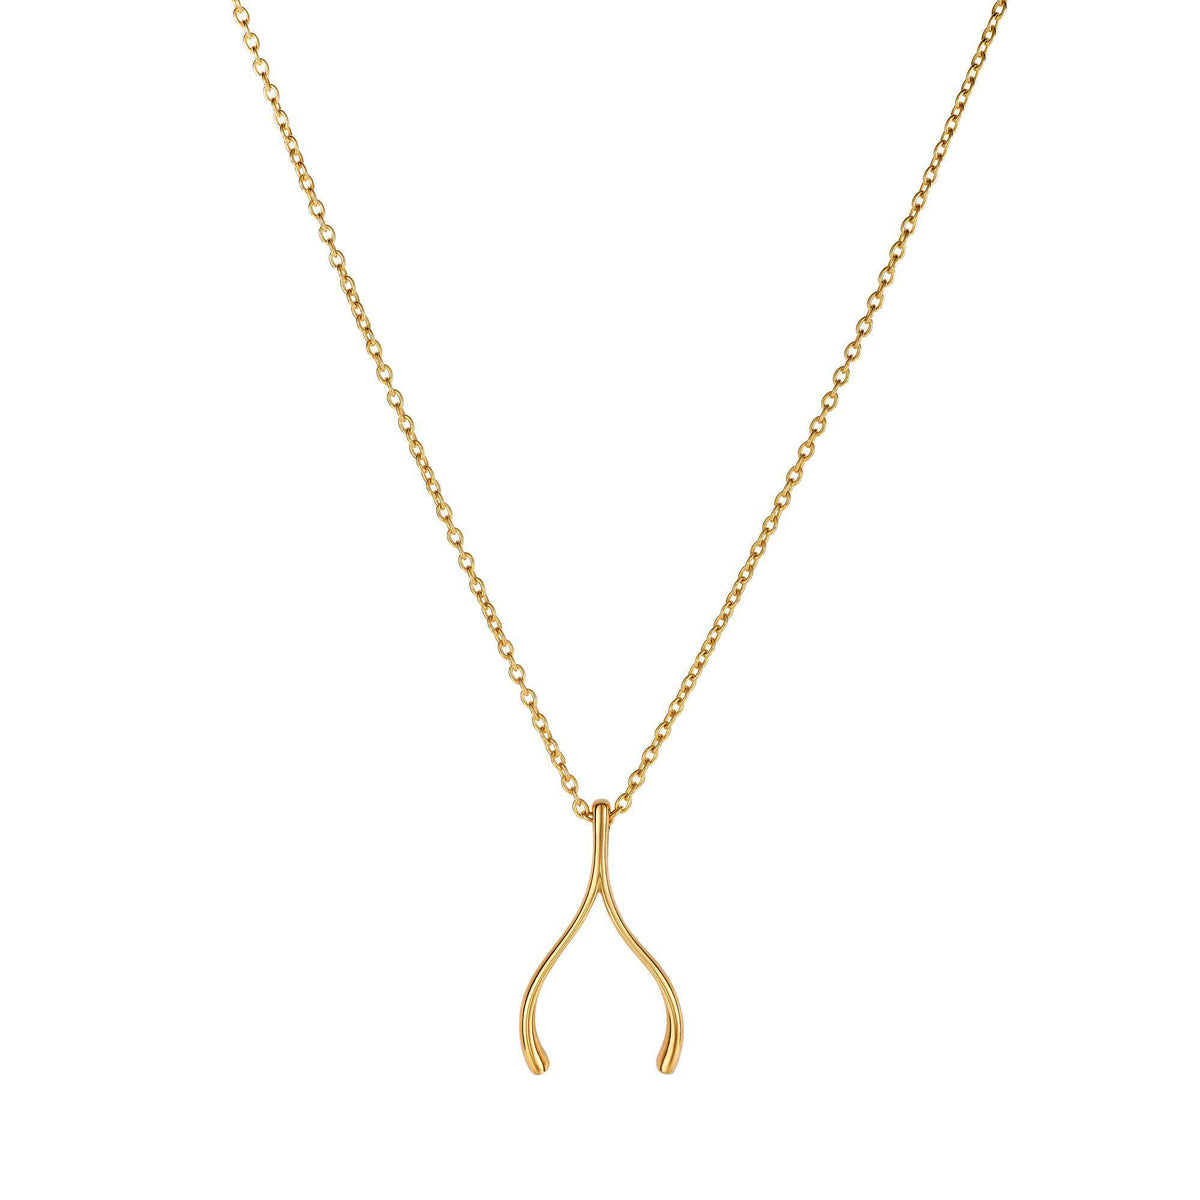 14k Yellow Gold Wishbone Charm Chain Necklace, 17" fine designer jewelry for men and women